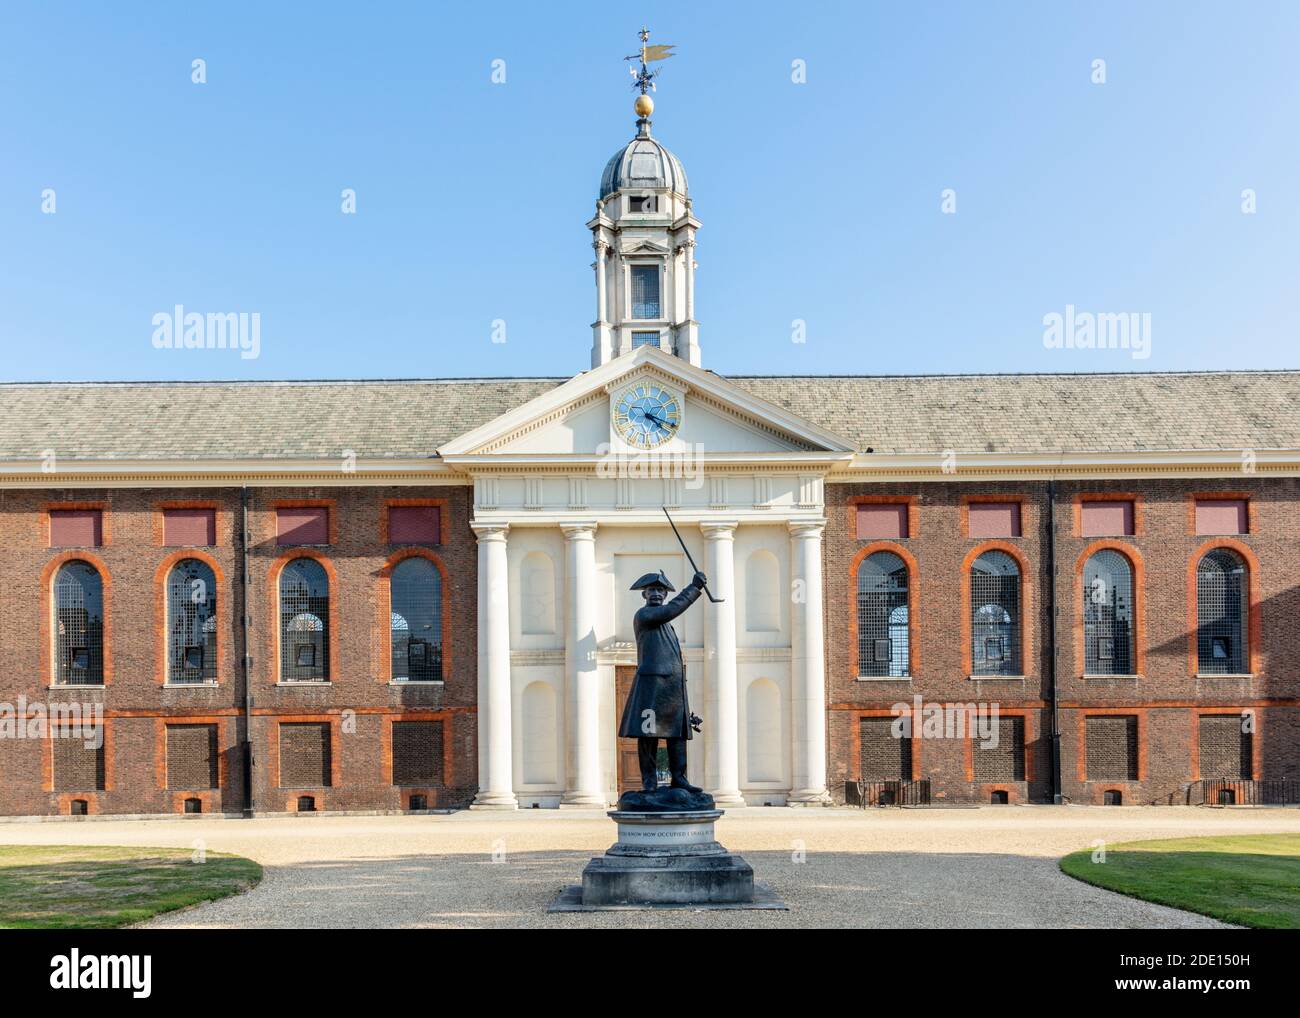 The facade of the Royal Hospital by Christopher Wren showing a statue of a Chelsea Pensioner, Kensington and Chelsea, London, England, United Kingdom Stock Photo